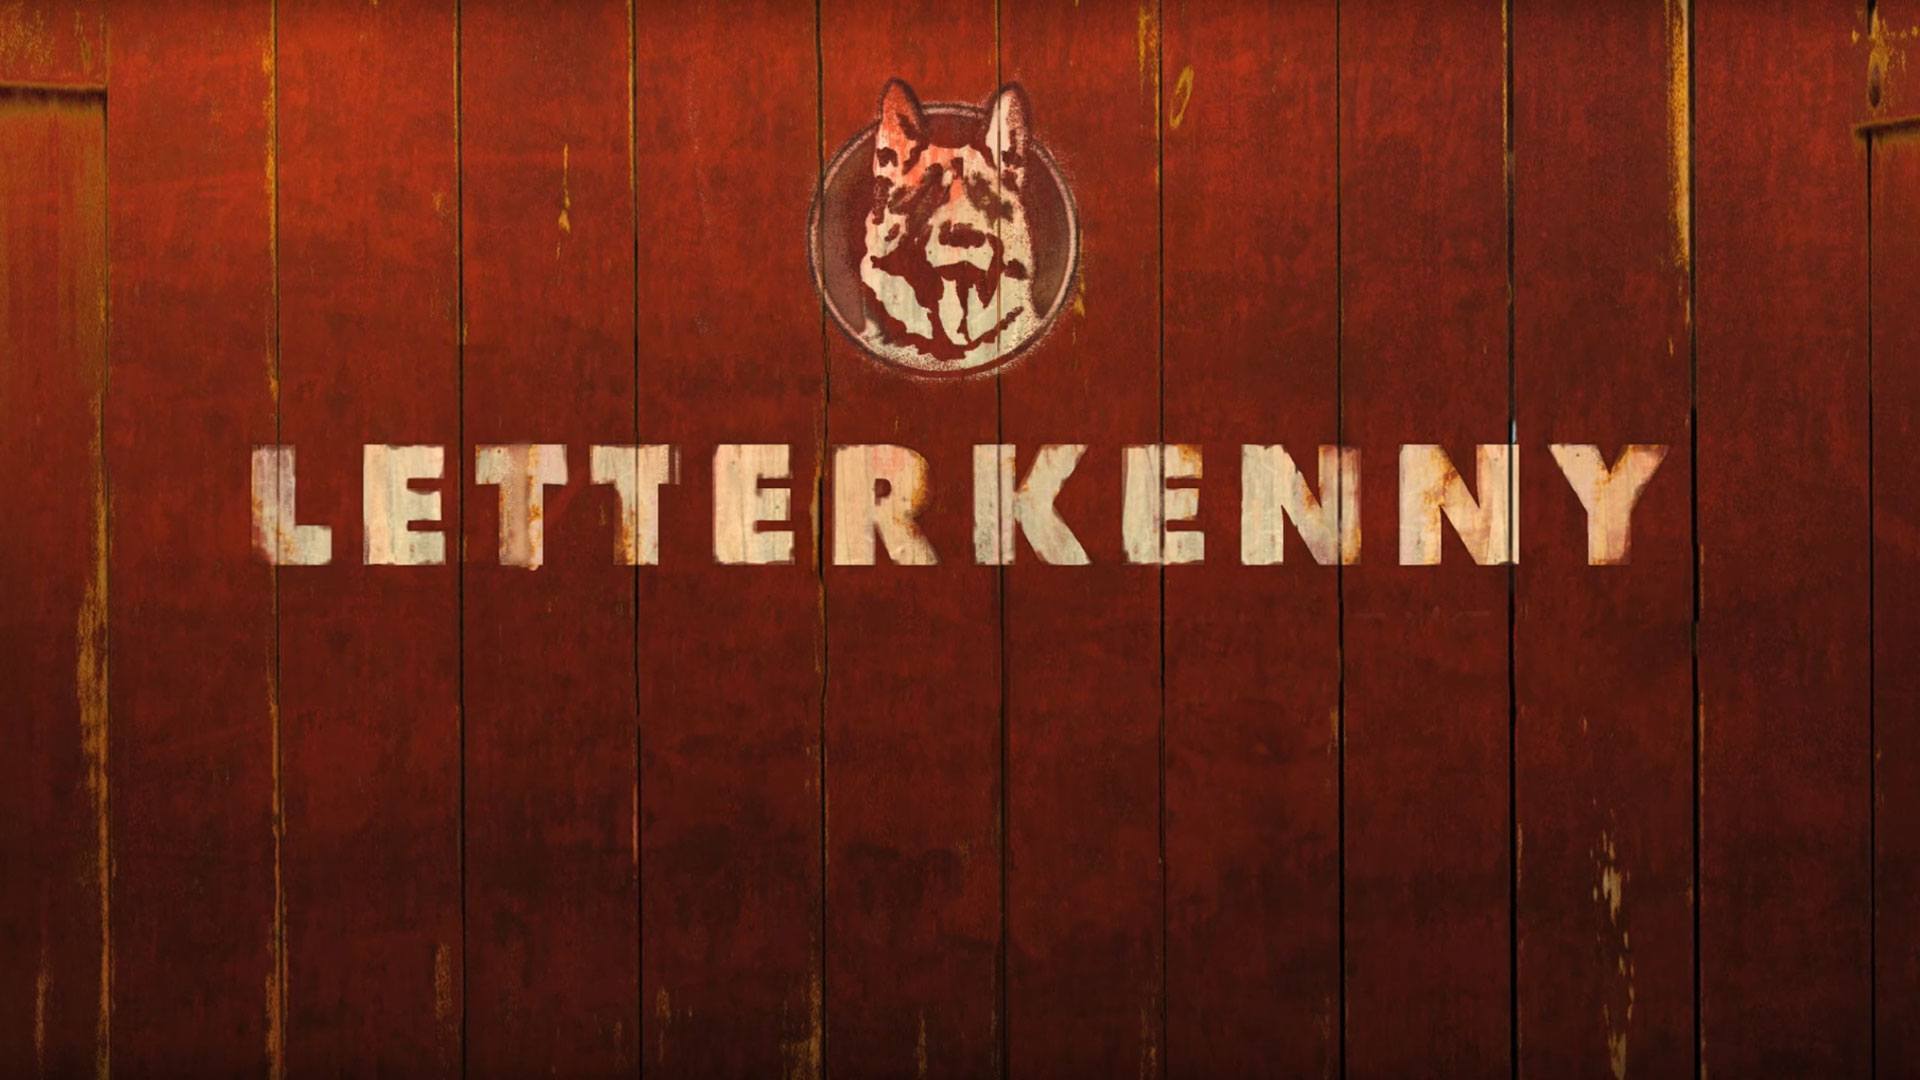 Letterkenny Wallpaper HD Download the best HD and ultra HD wallpaper for free